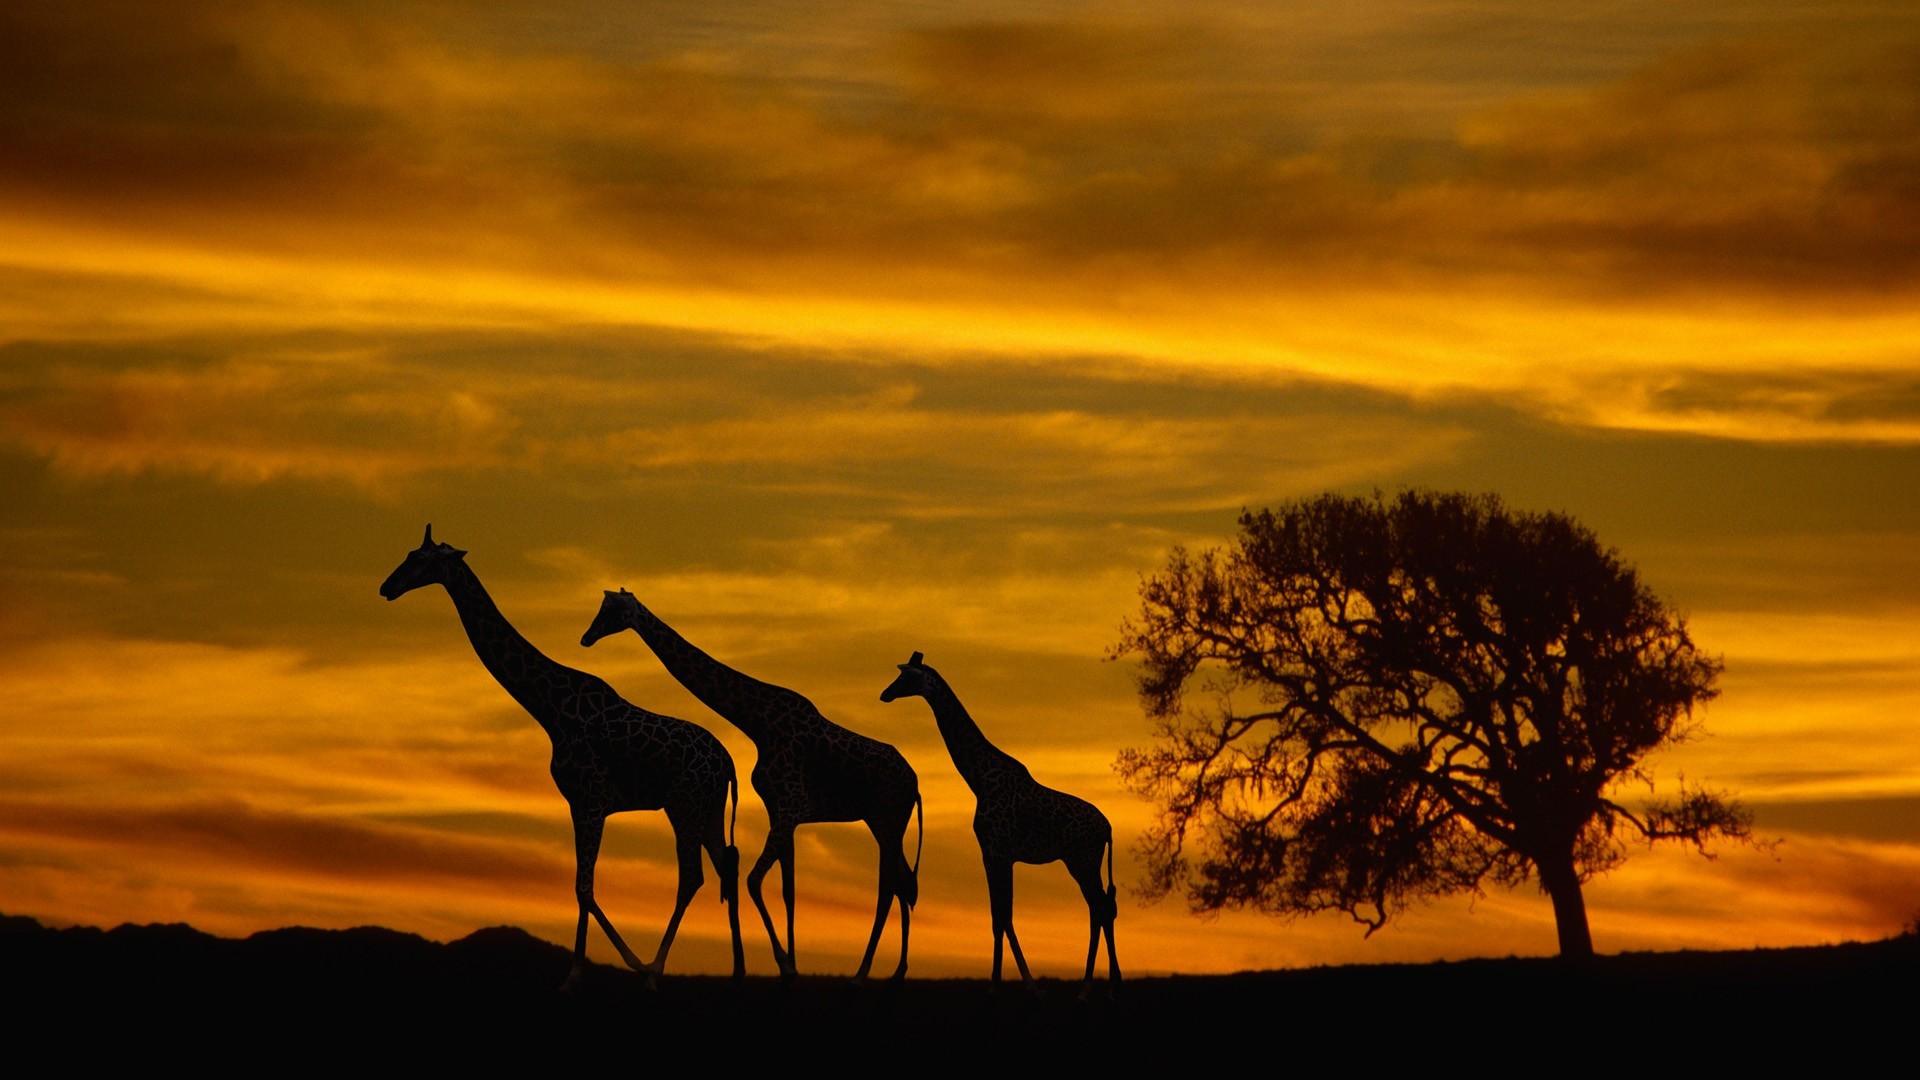 Family of giraffes in Africa at sunset wallpapers and image